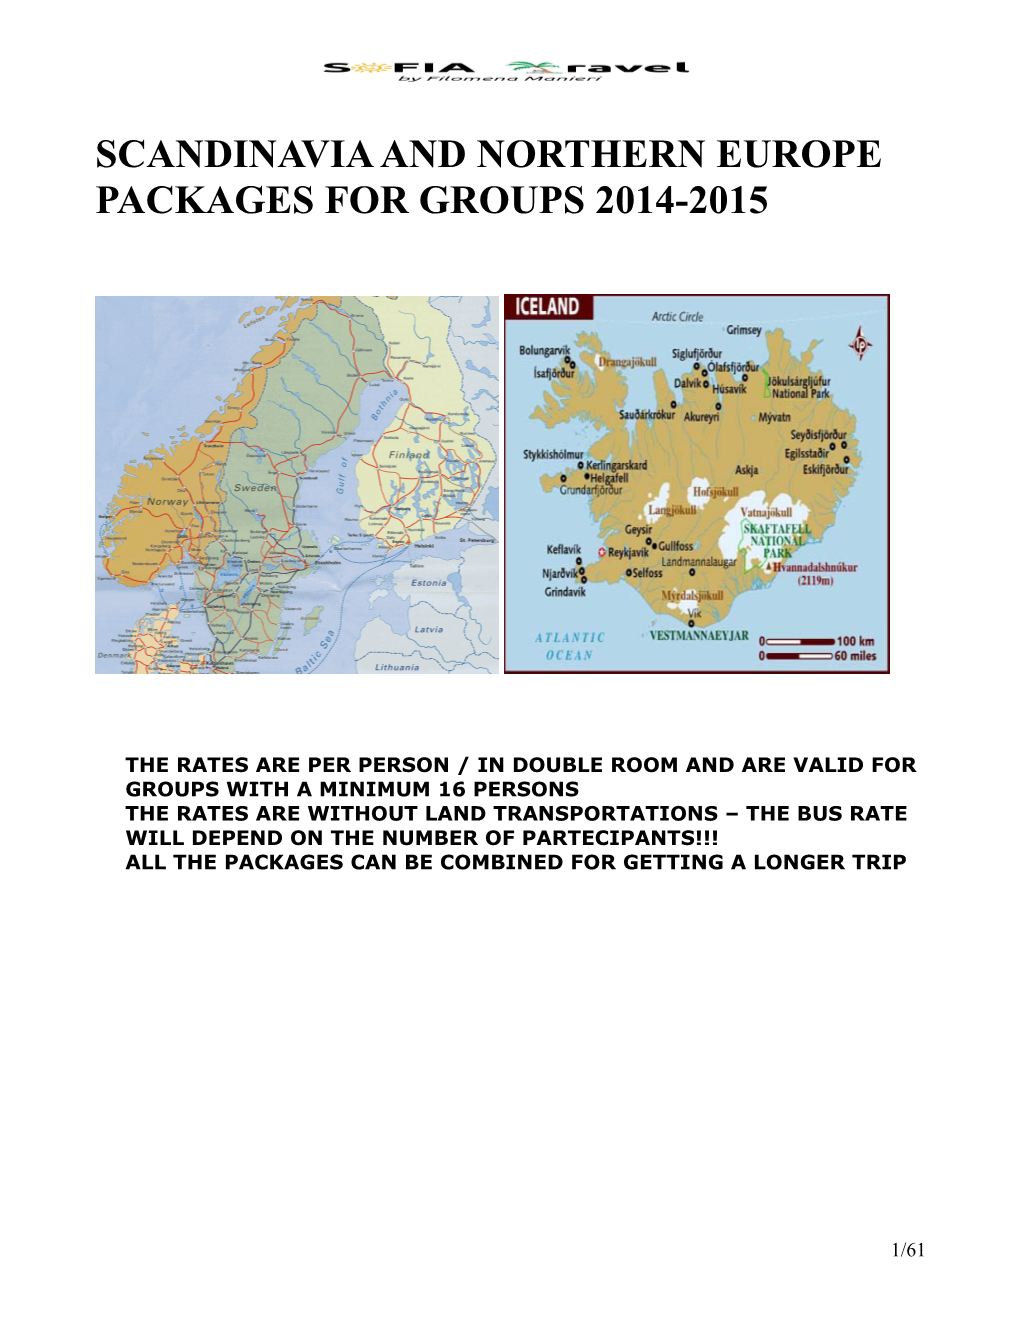 Scandinavia and Northern Europe Packages for Groups 2014-2015